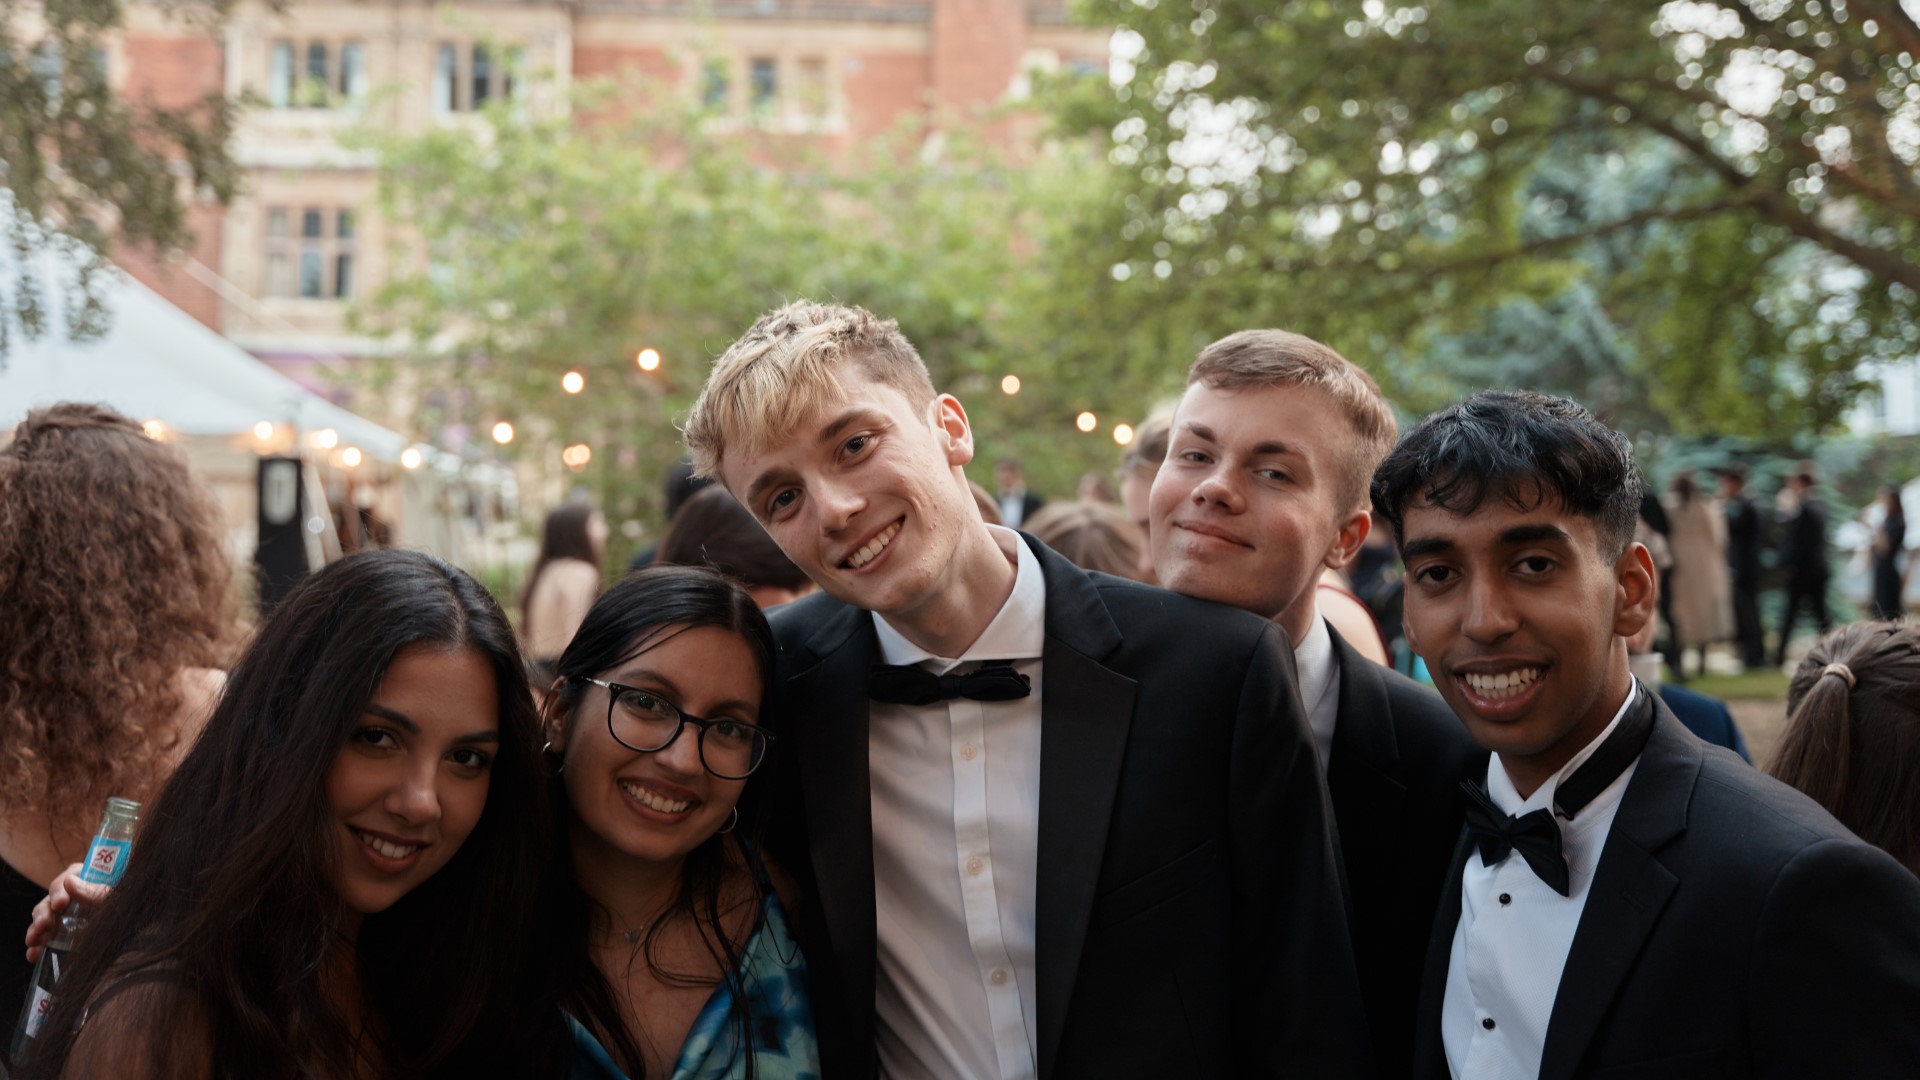 A small group of smartly dressed partygoers smile for the camera.